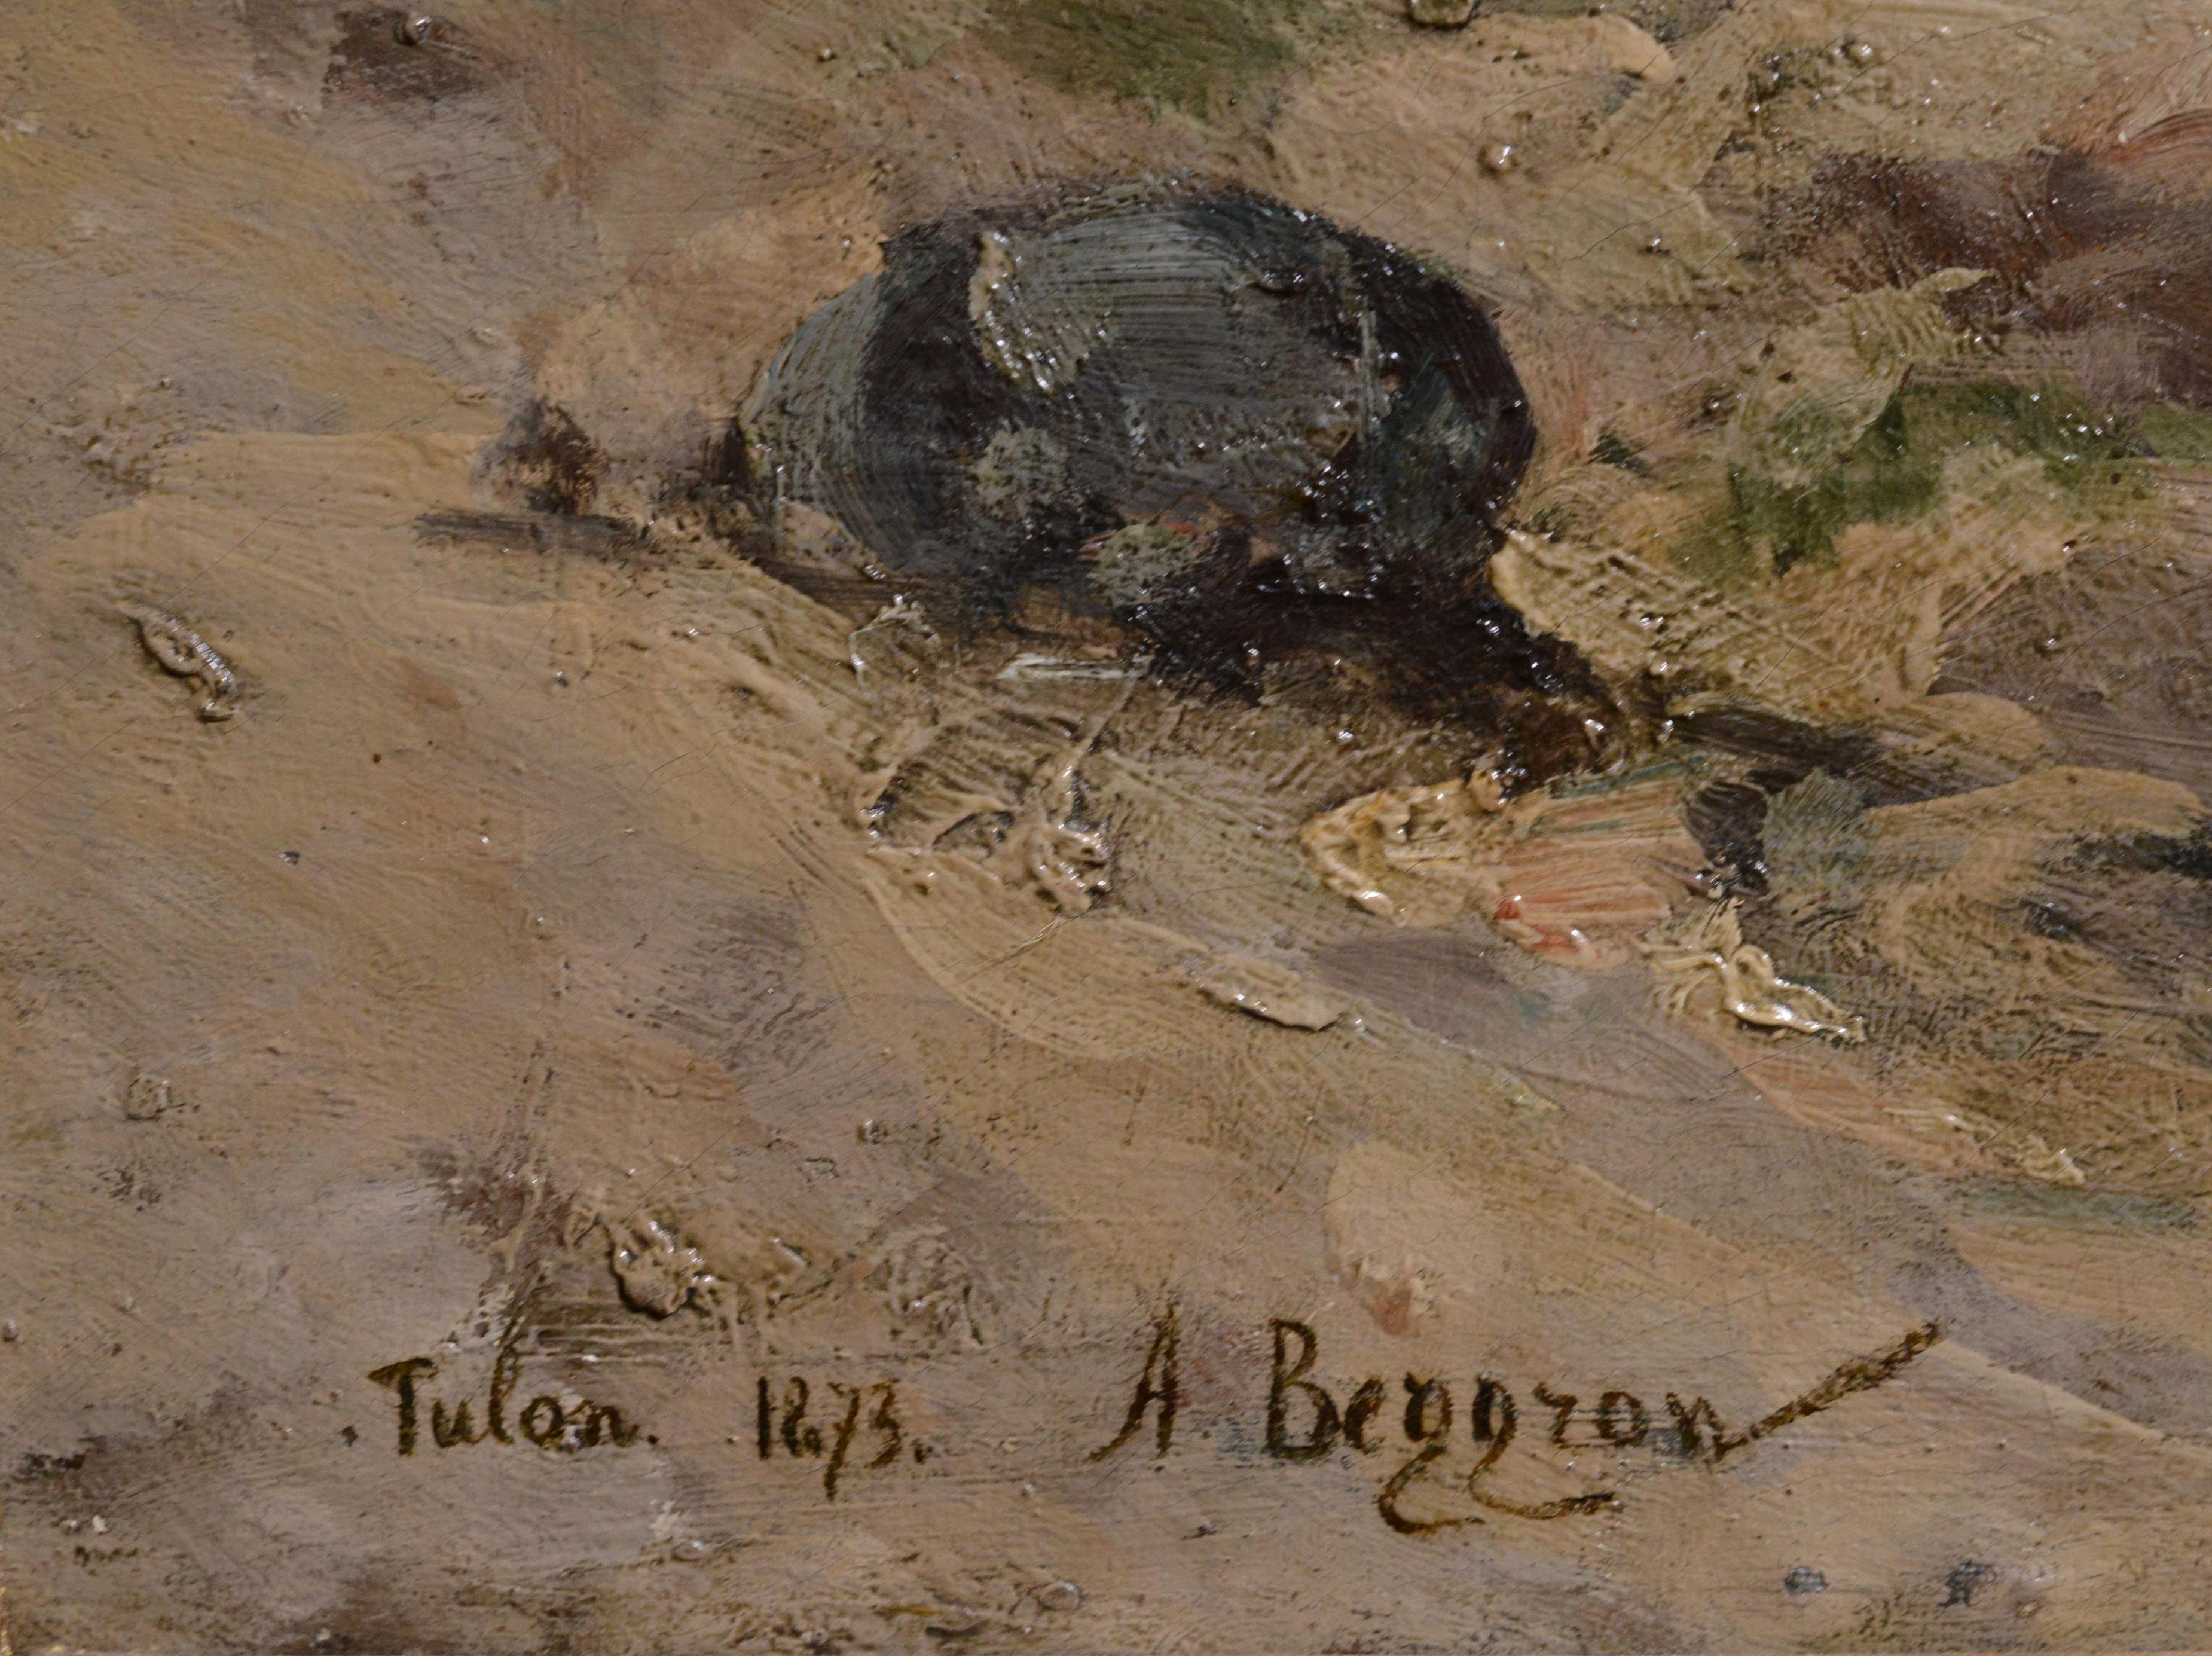 Signed and dated: Tulon 1873, A. Beggrow (Beggrov), attributed Alexander Karlovich Beggrov (1841-1914) was a Russian landscape painter. He notable for his seascapes and Saint Petersburg cityscapes. The painting was purchased in a private collection